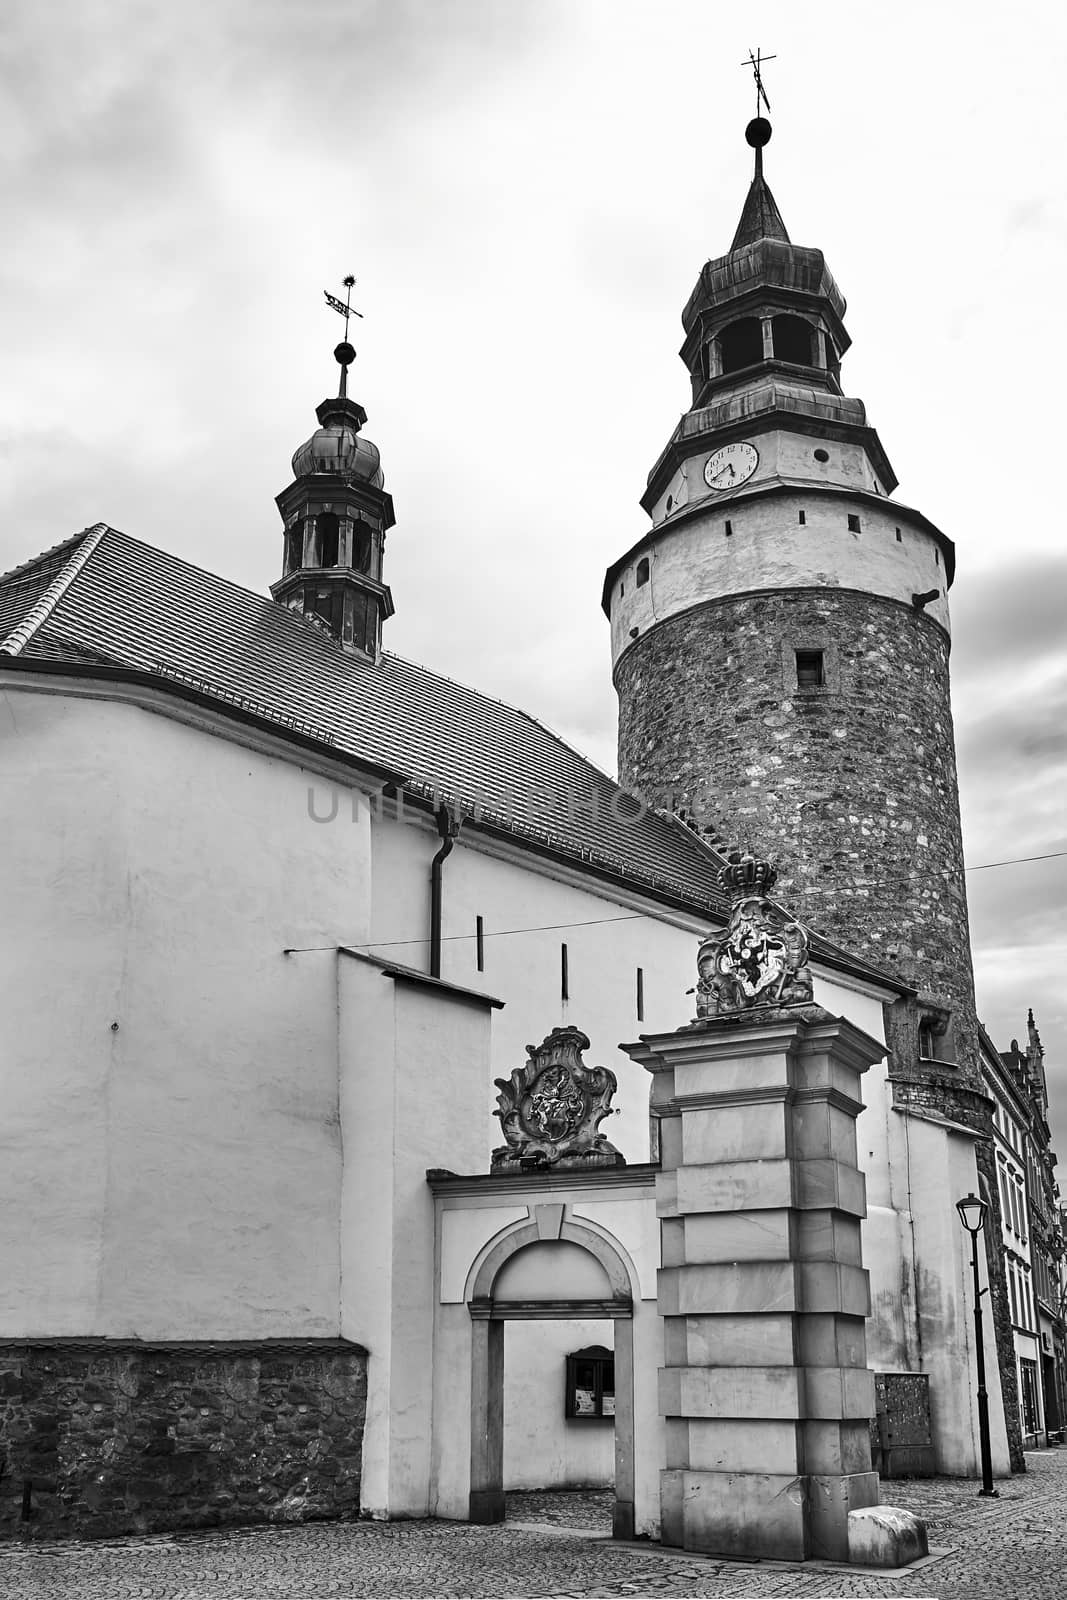 A medieval, stone church with a bell tower and a fragment of the city gate in Jelenia Gora in Poland, black and white